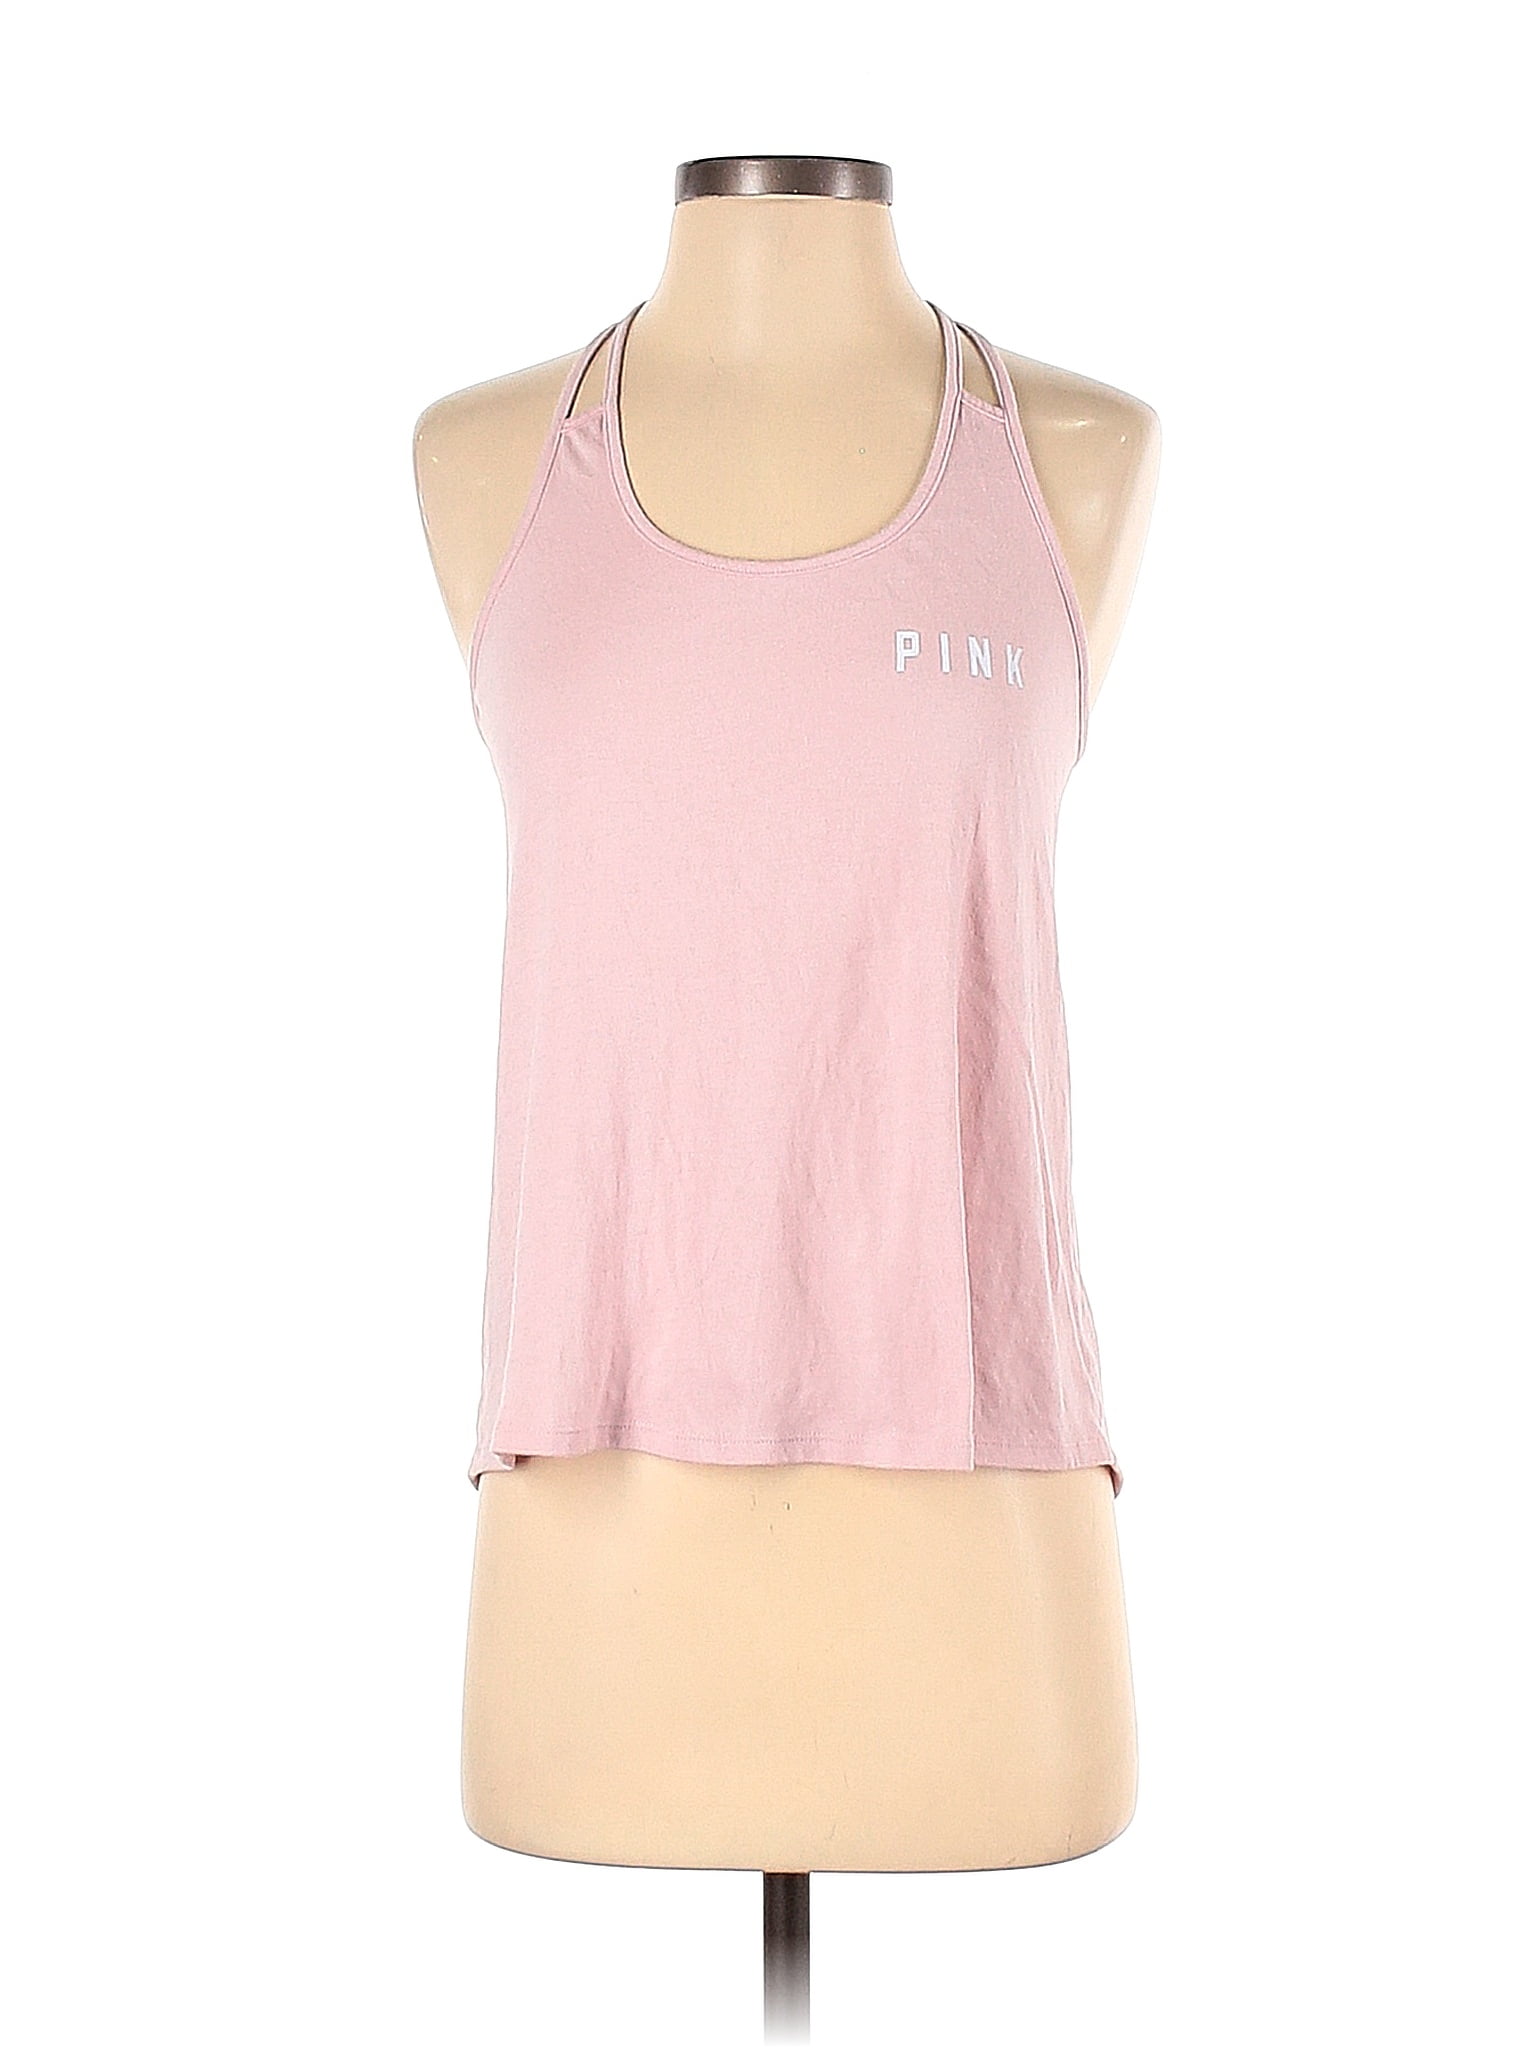 Pre-Owned Victorias Secret Pink Womens Size S Mauritius